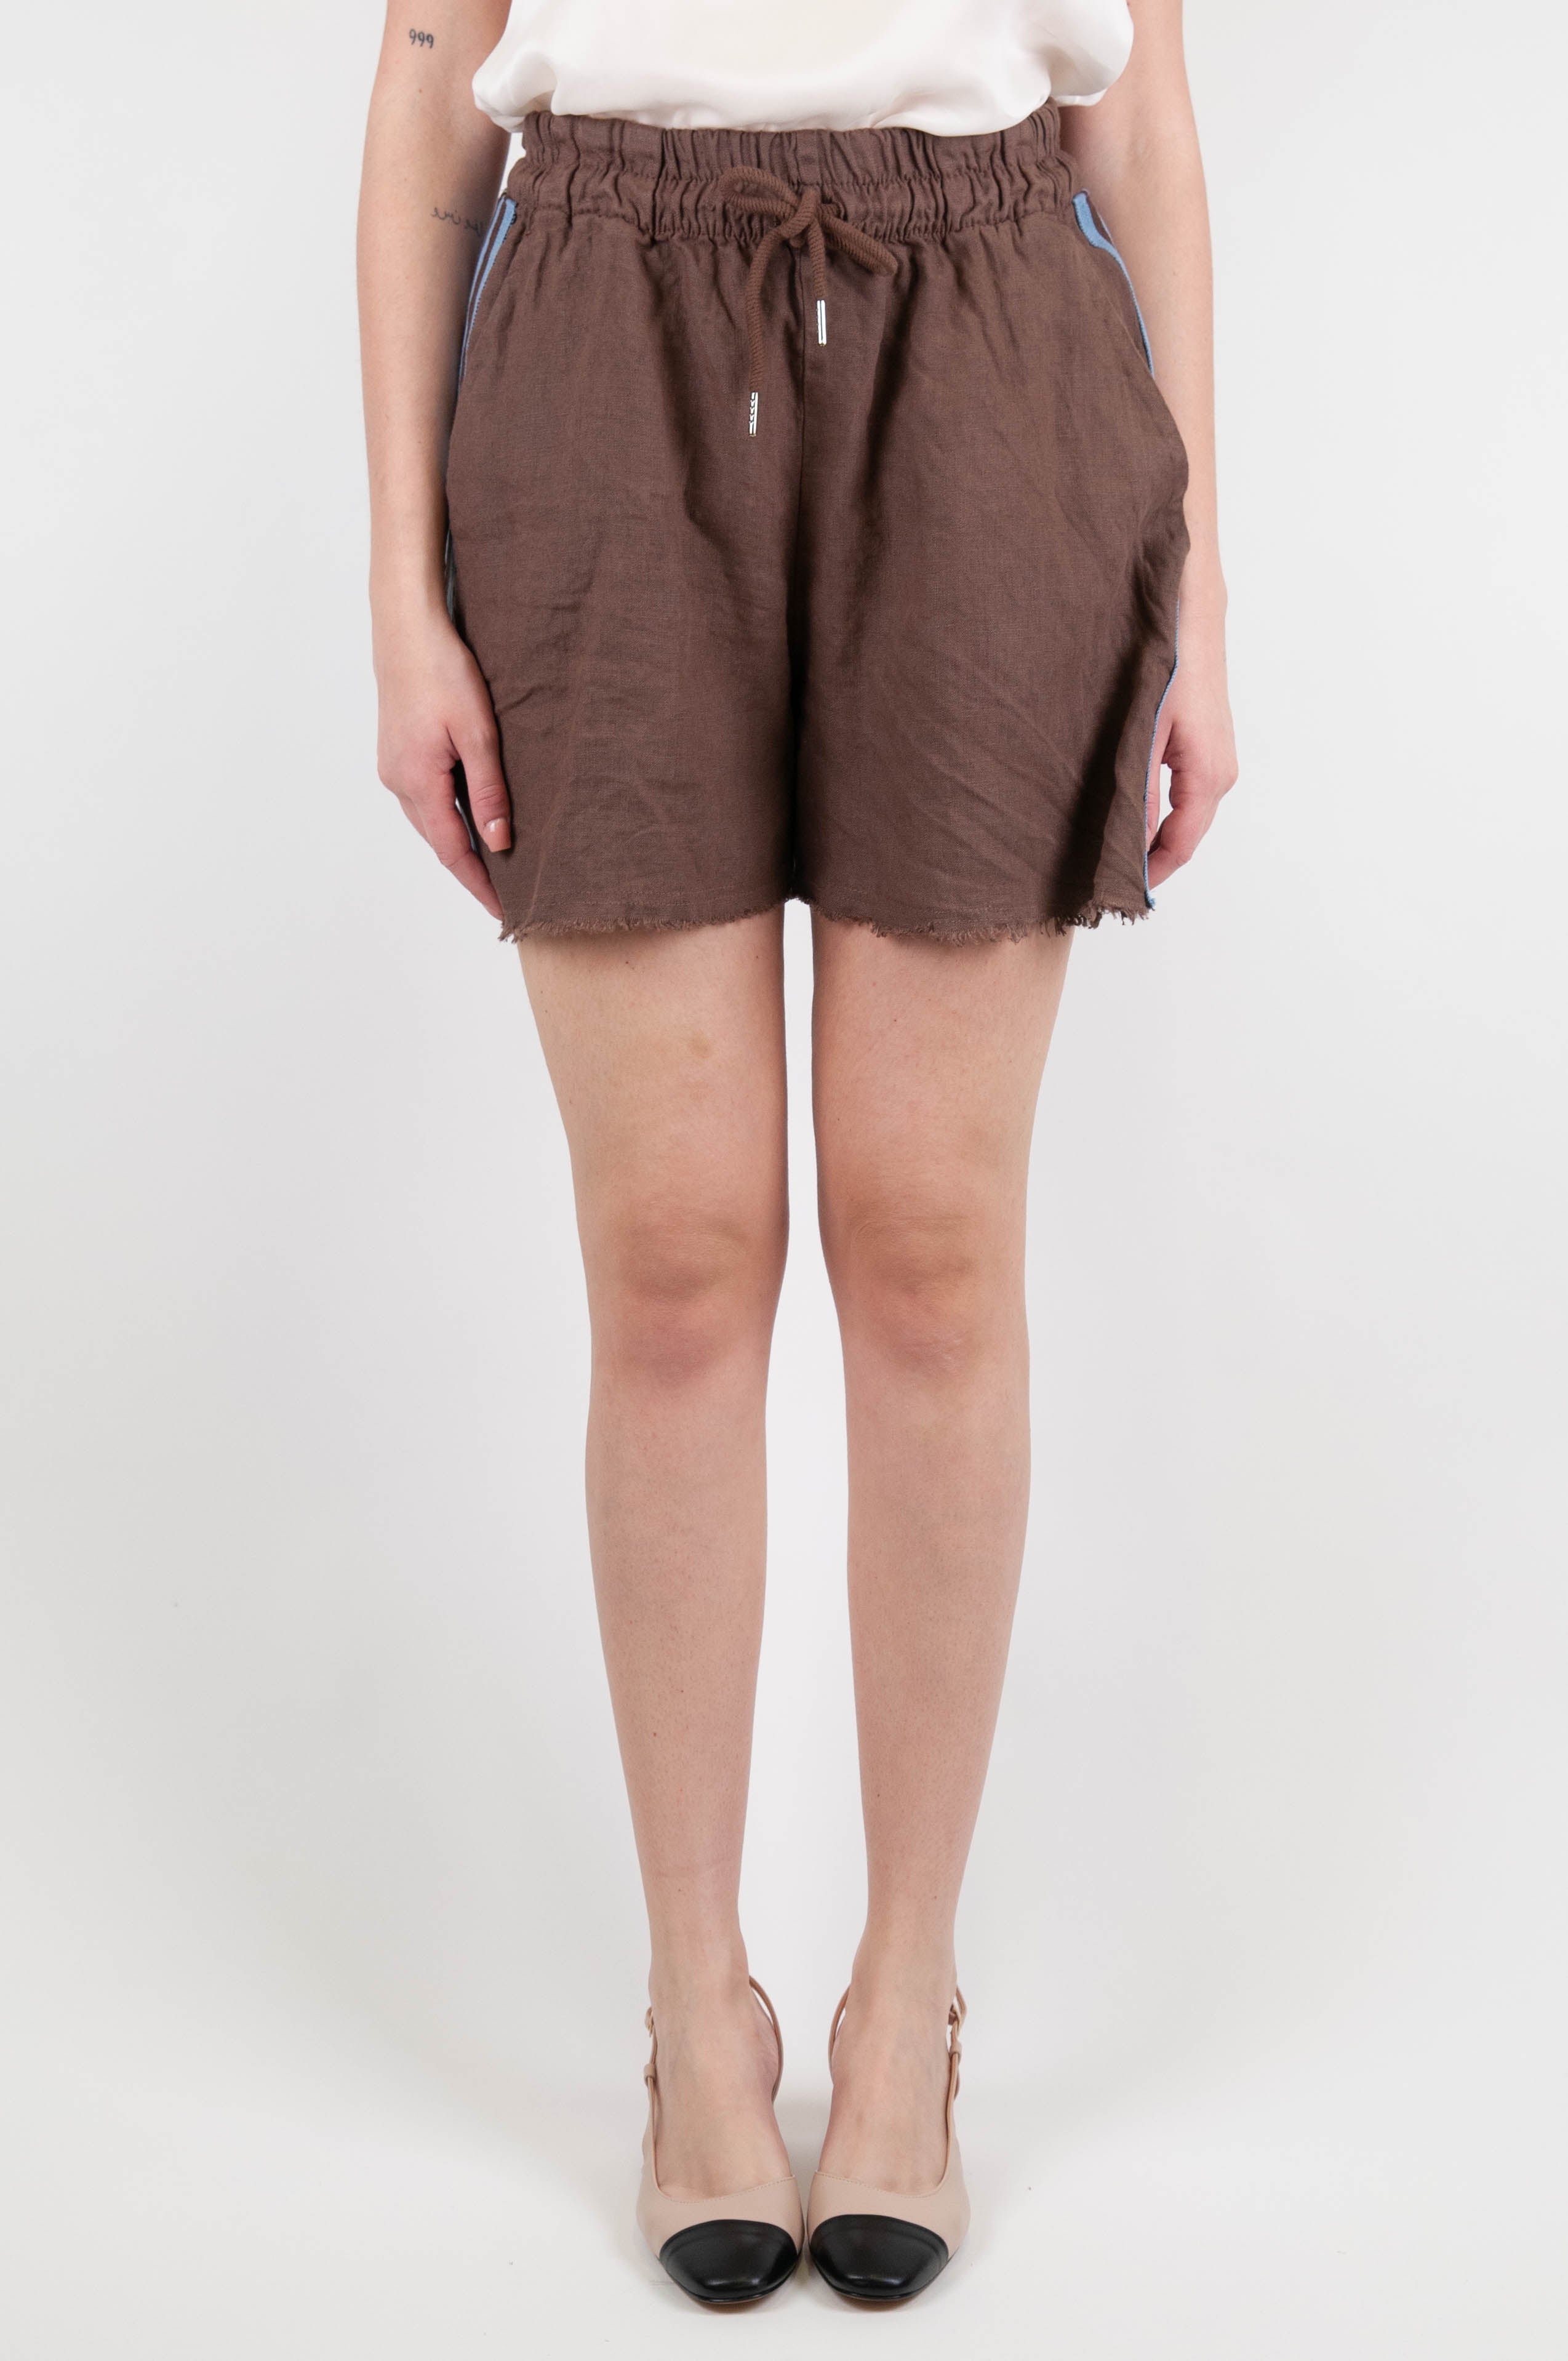 Motel - Linen shorts with drawstring and contrasting side band